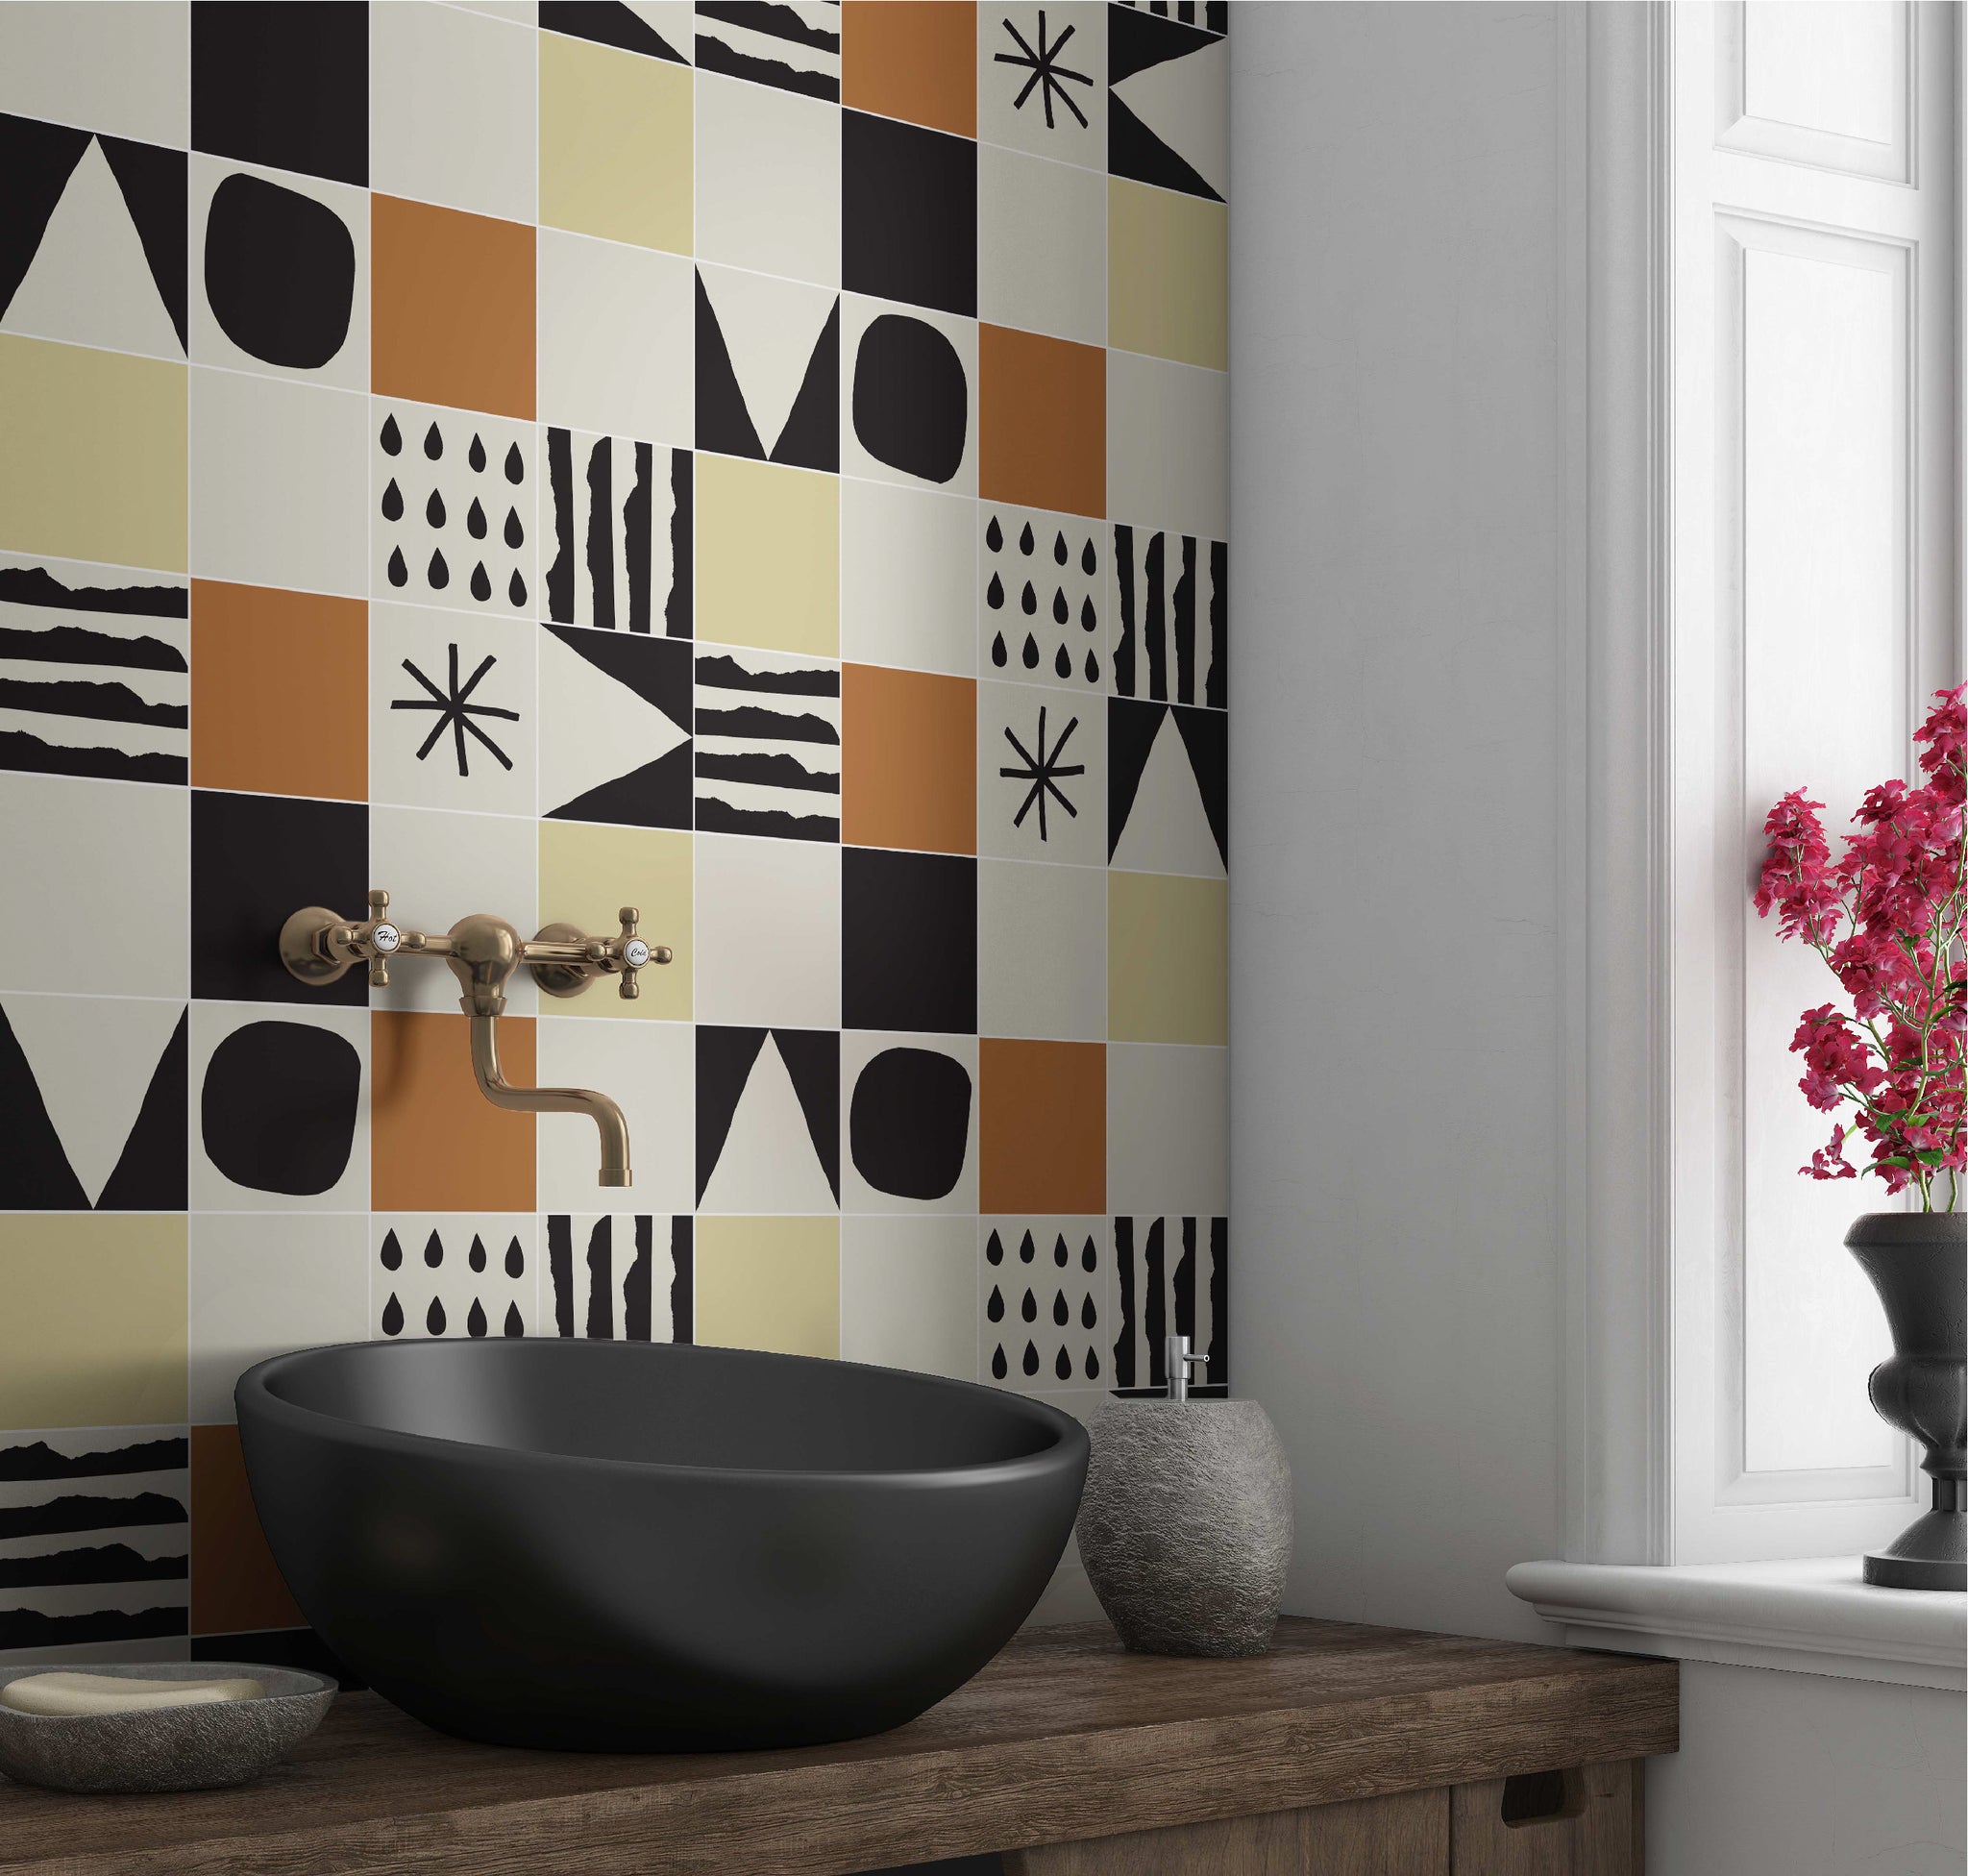 Kitchen with yellow, white, and orange tile with black designs on them backsplash wall by clay imports